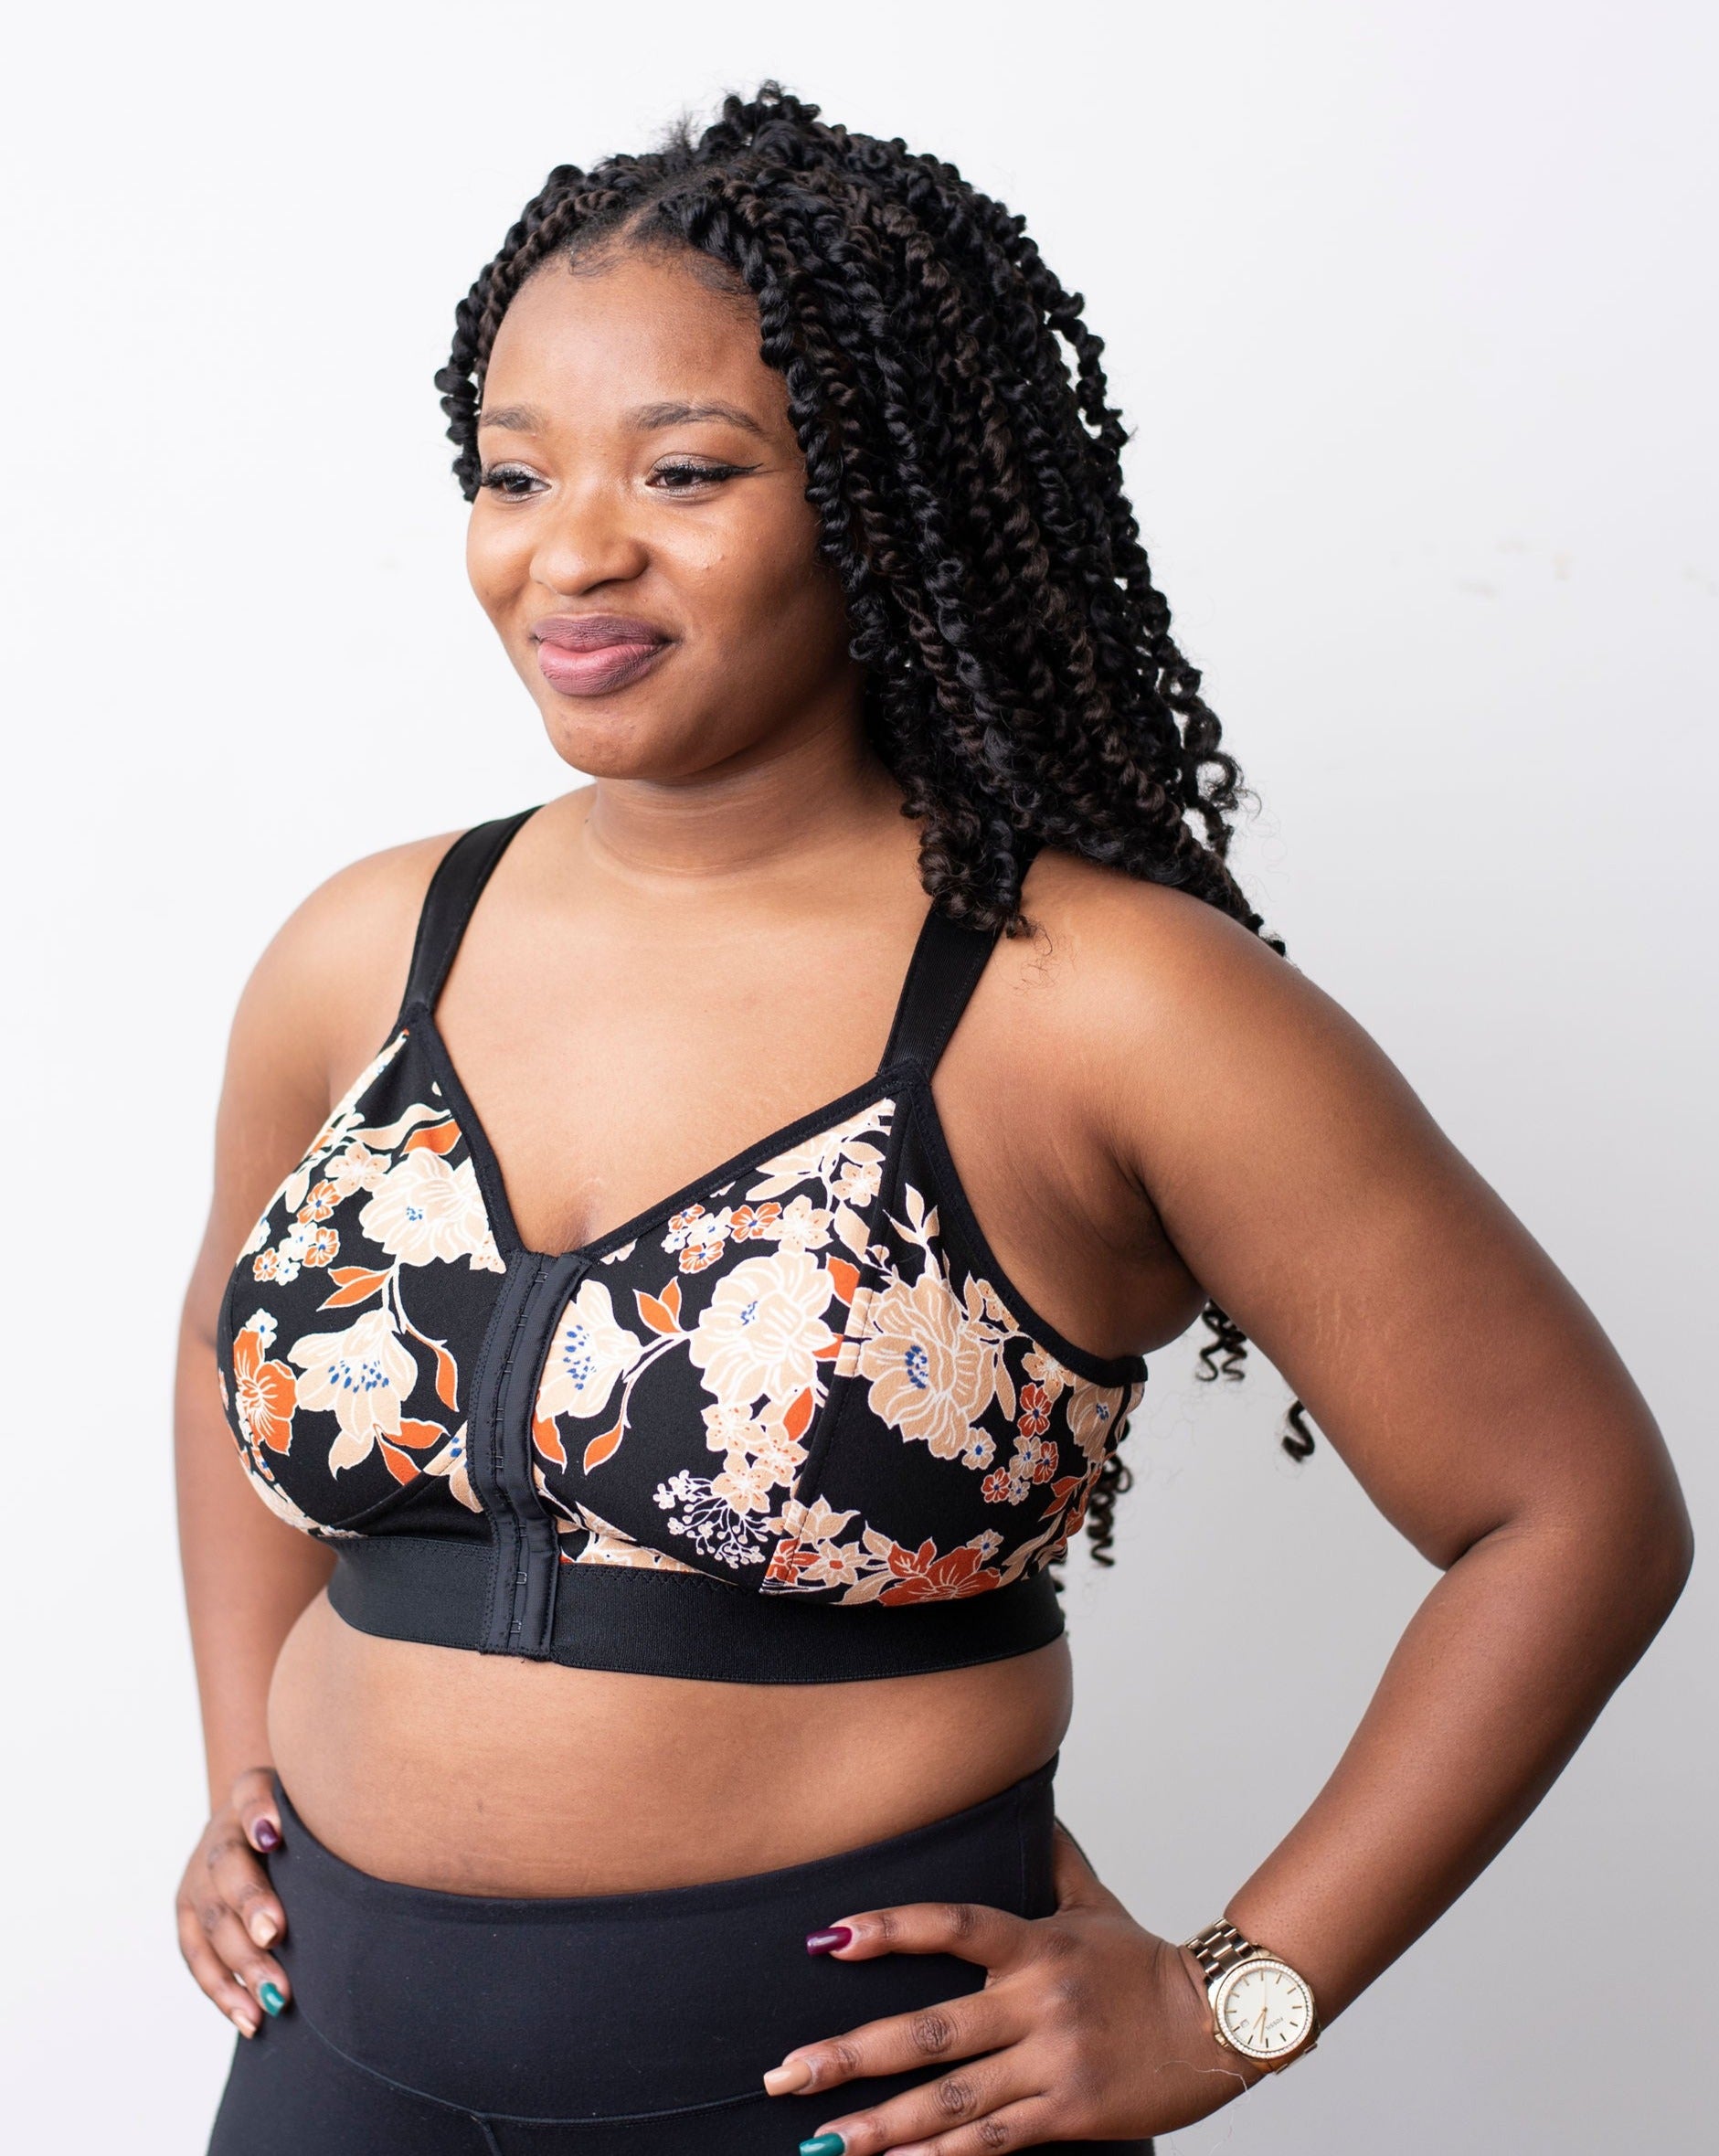 RUBIES BRAS MASTECTOMY BRA FOR BREAST CANCER SURGERIES. FRONT CLOSURE WITH LOW STRETCH AND WIDE ELASTICS FOR COMFORT AND SUPPORT. BUILT IN PROSTHESIS AND DRAINAGE POCKET MADE ON REQUEST